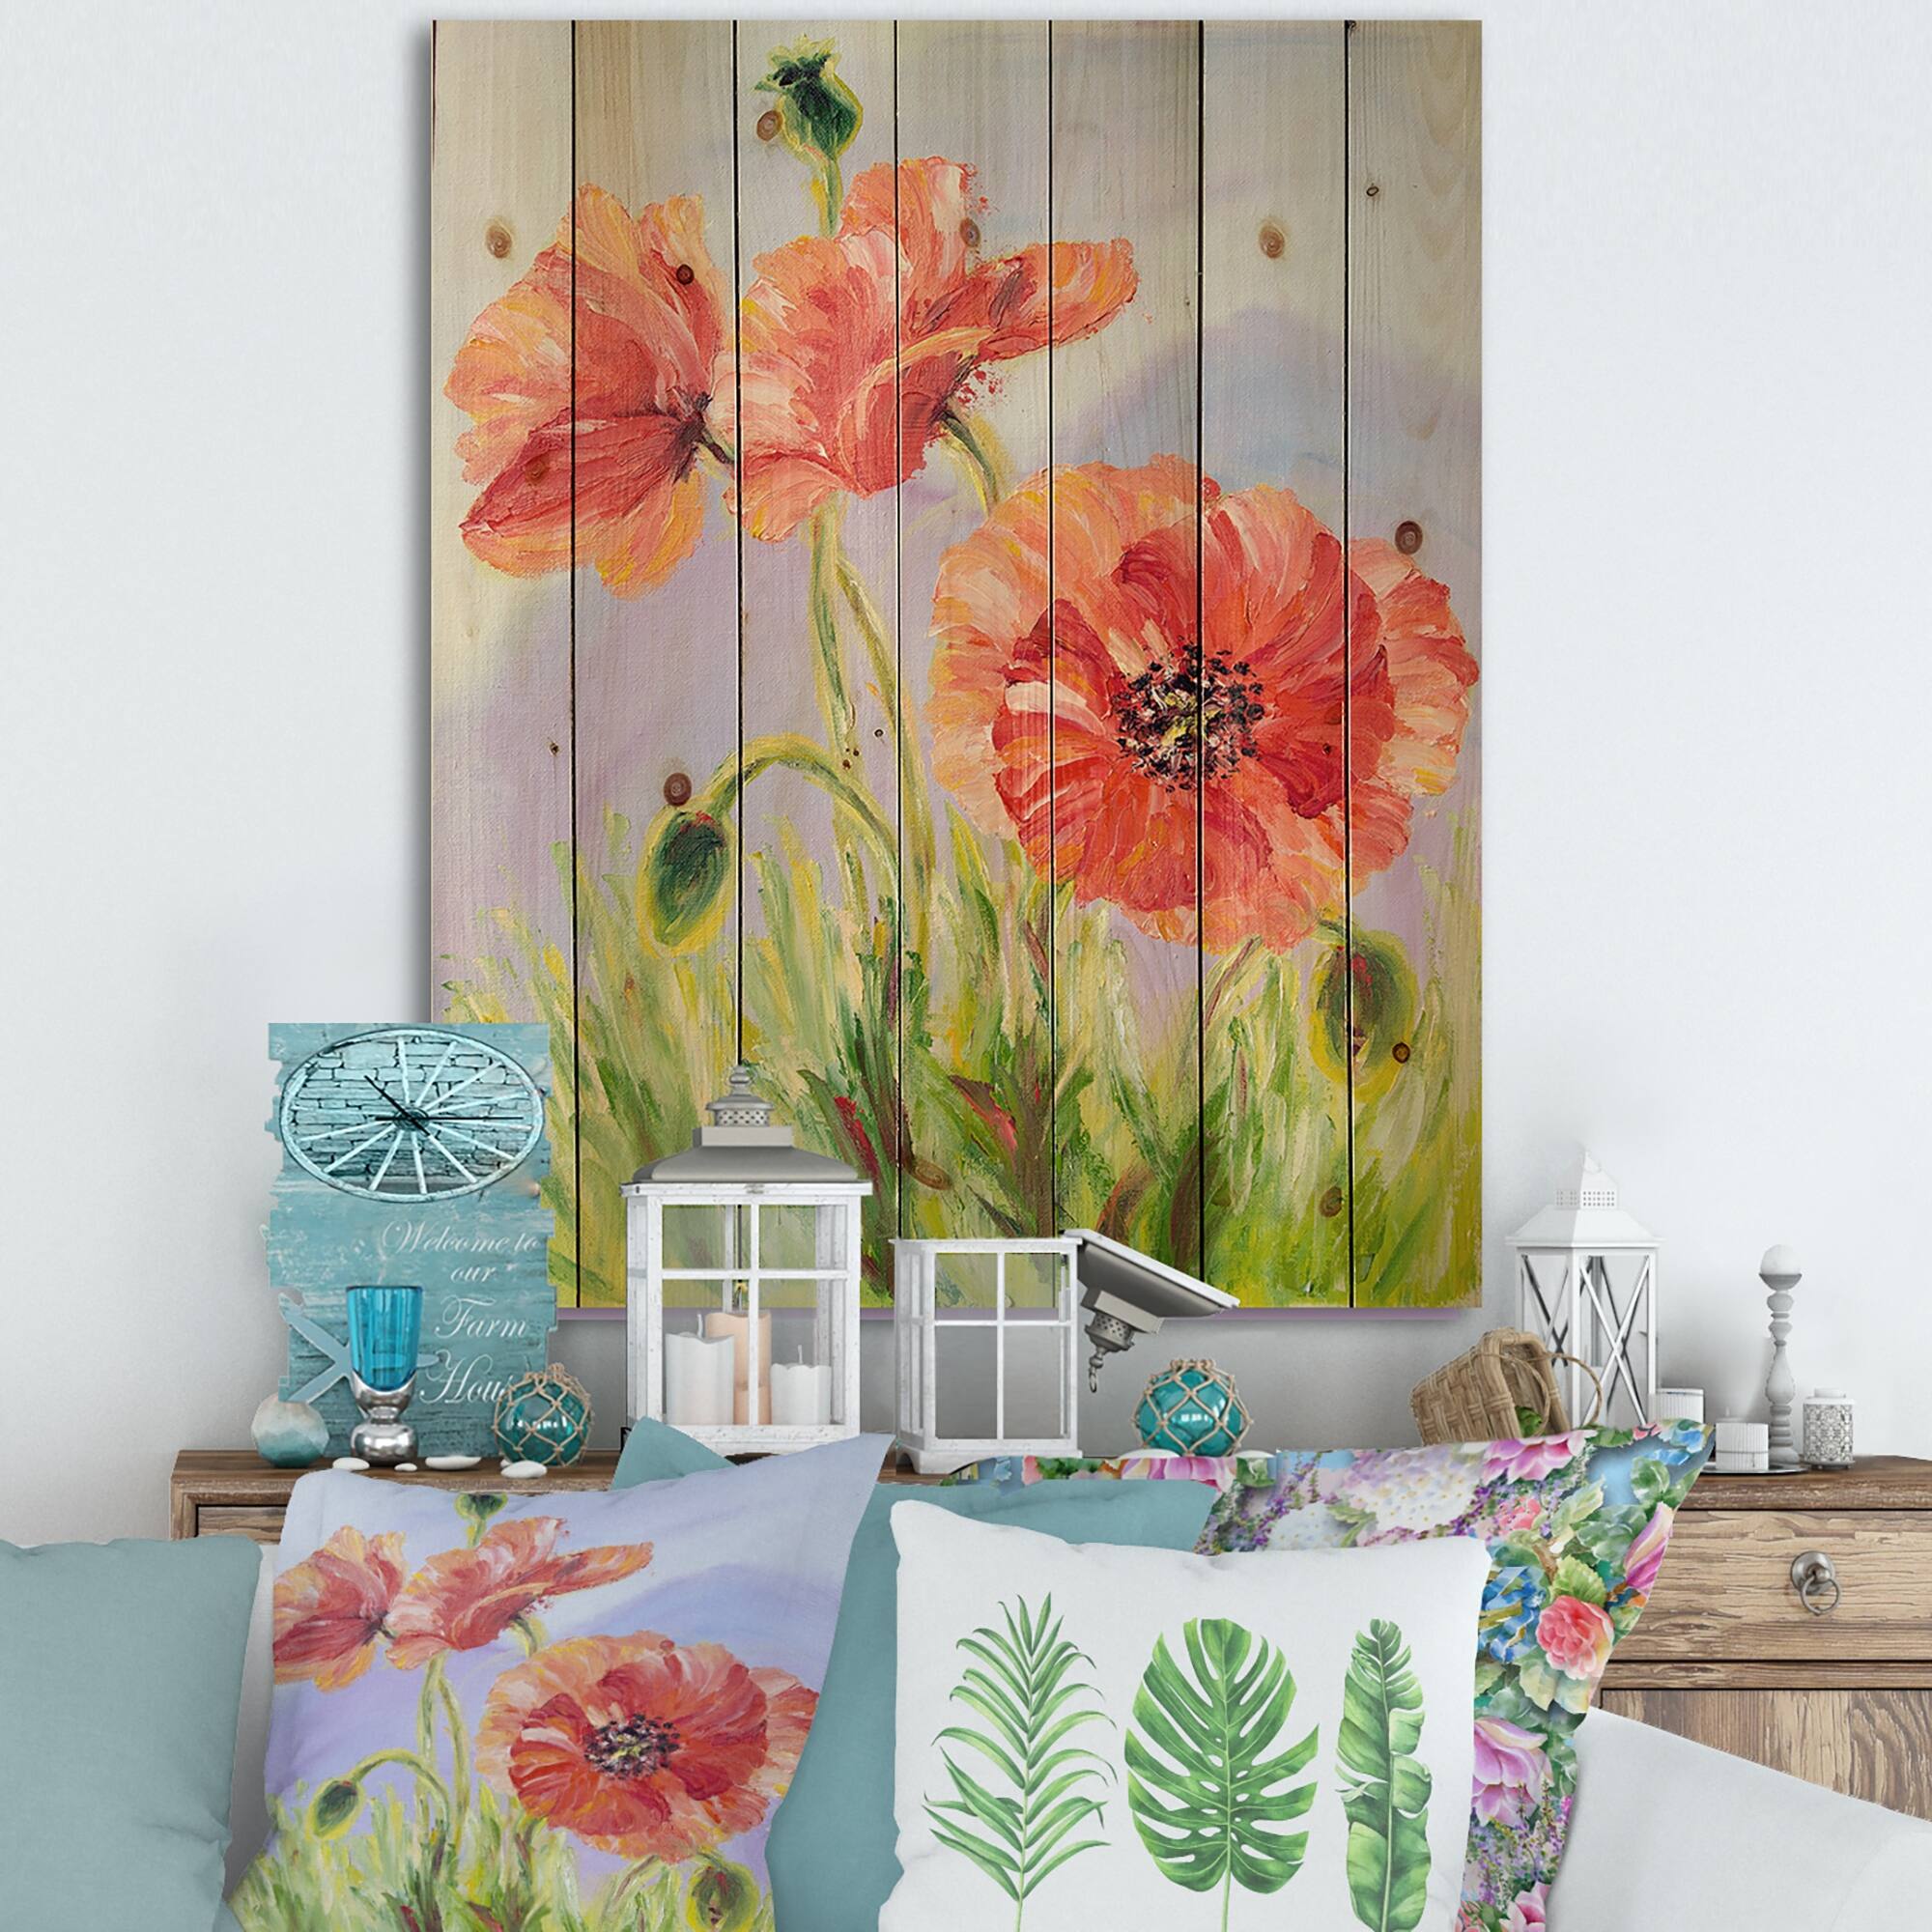 Designart 'Blossoming Poppies In The Morning IV' Traditional Print on ...